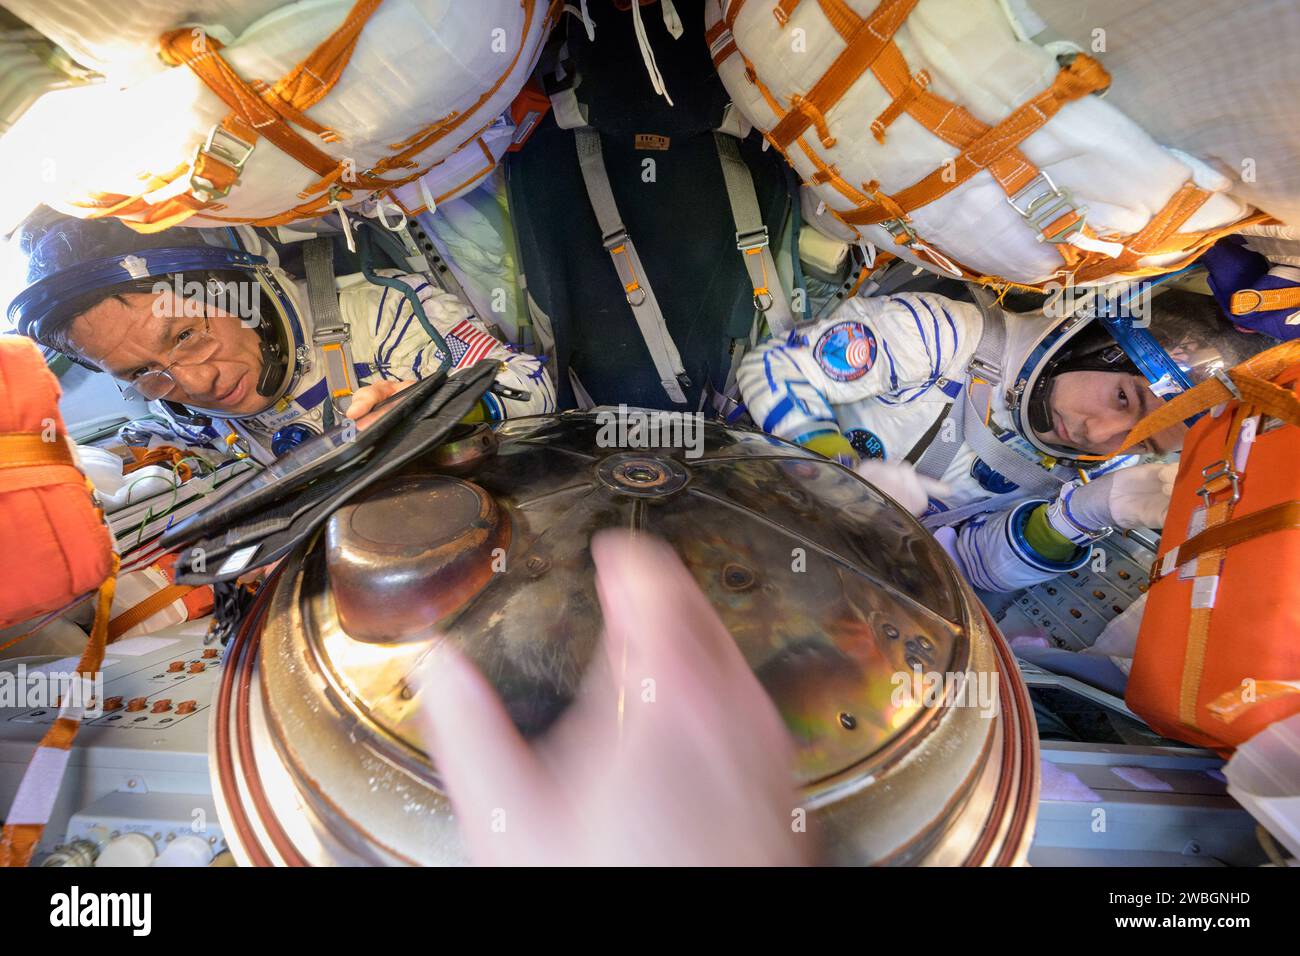 Expedition 69 NASA astronaut Frank Rubio, left, and Roscosmos cosmonaut Dmitri Petelin are seen inside the Soyuz MS-23 spacecraft just minutes after they and Roscosmos cosmonaut Sergey Prokopyev, landed in a remote area near the town of Zhezkazgan, Kazakhstan on Wednesday, Sept. 27, 2023. The trio are returning to Earth after logging 371 days in space as members of Expeditions 68-69 aboard the International Space Station. For Rubio, his mission is the longest single spaceflight by a U.S. astronaut in history. Photo Credit: (NASA/Bill Ingalls) Stock Photo